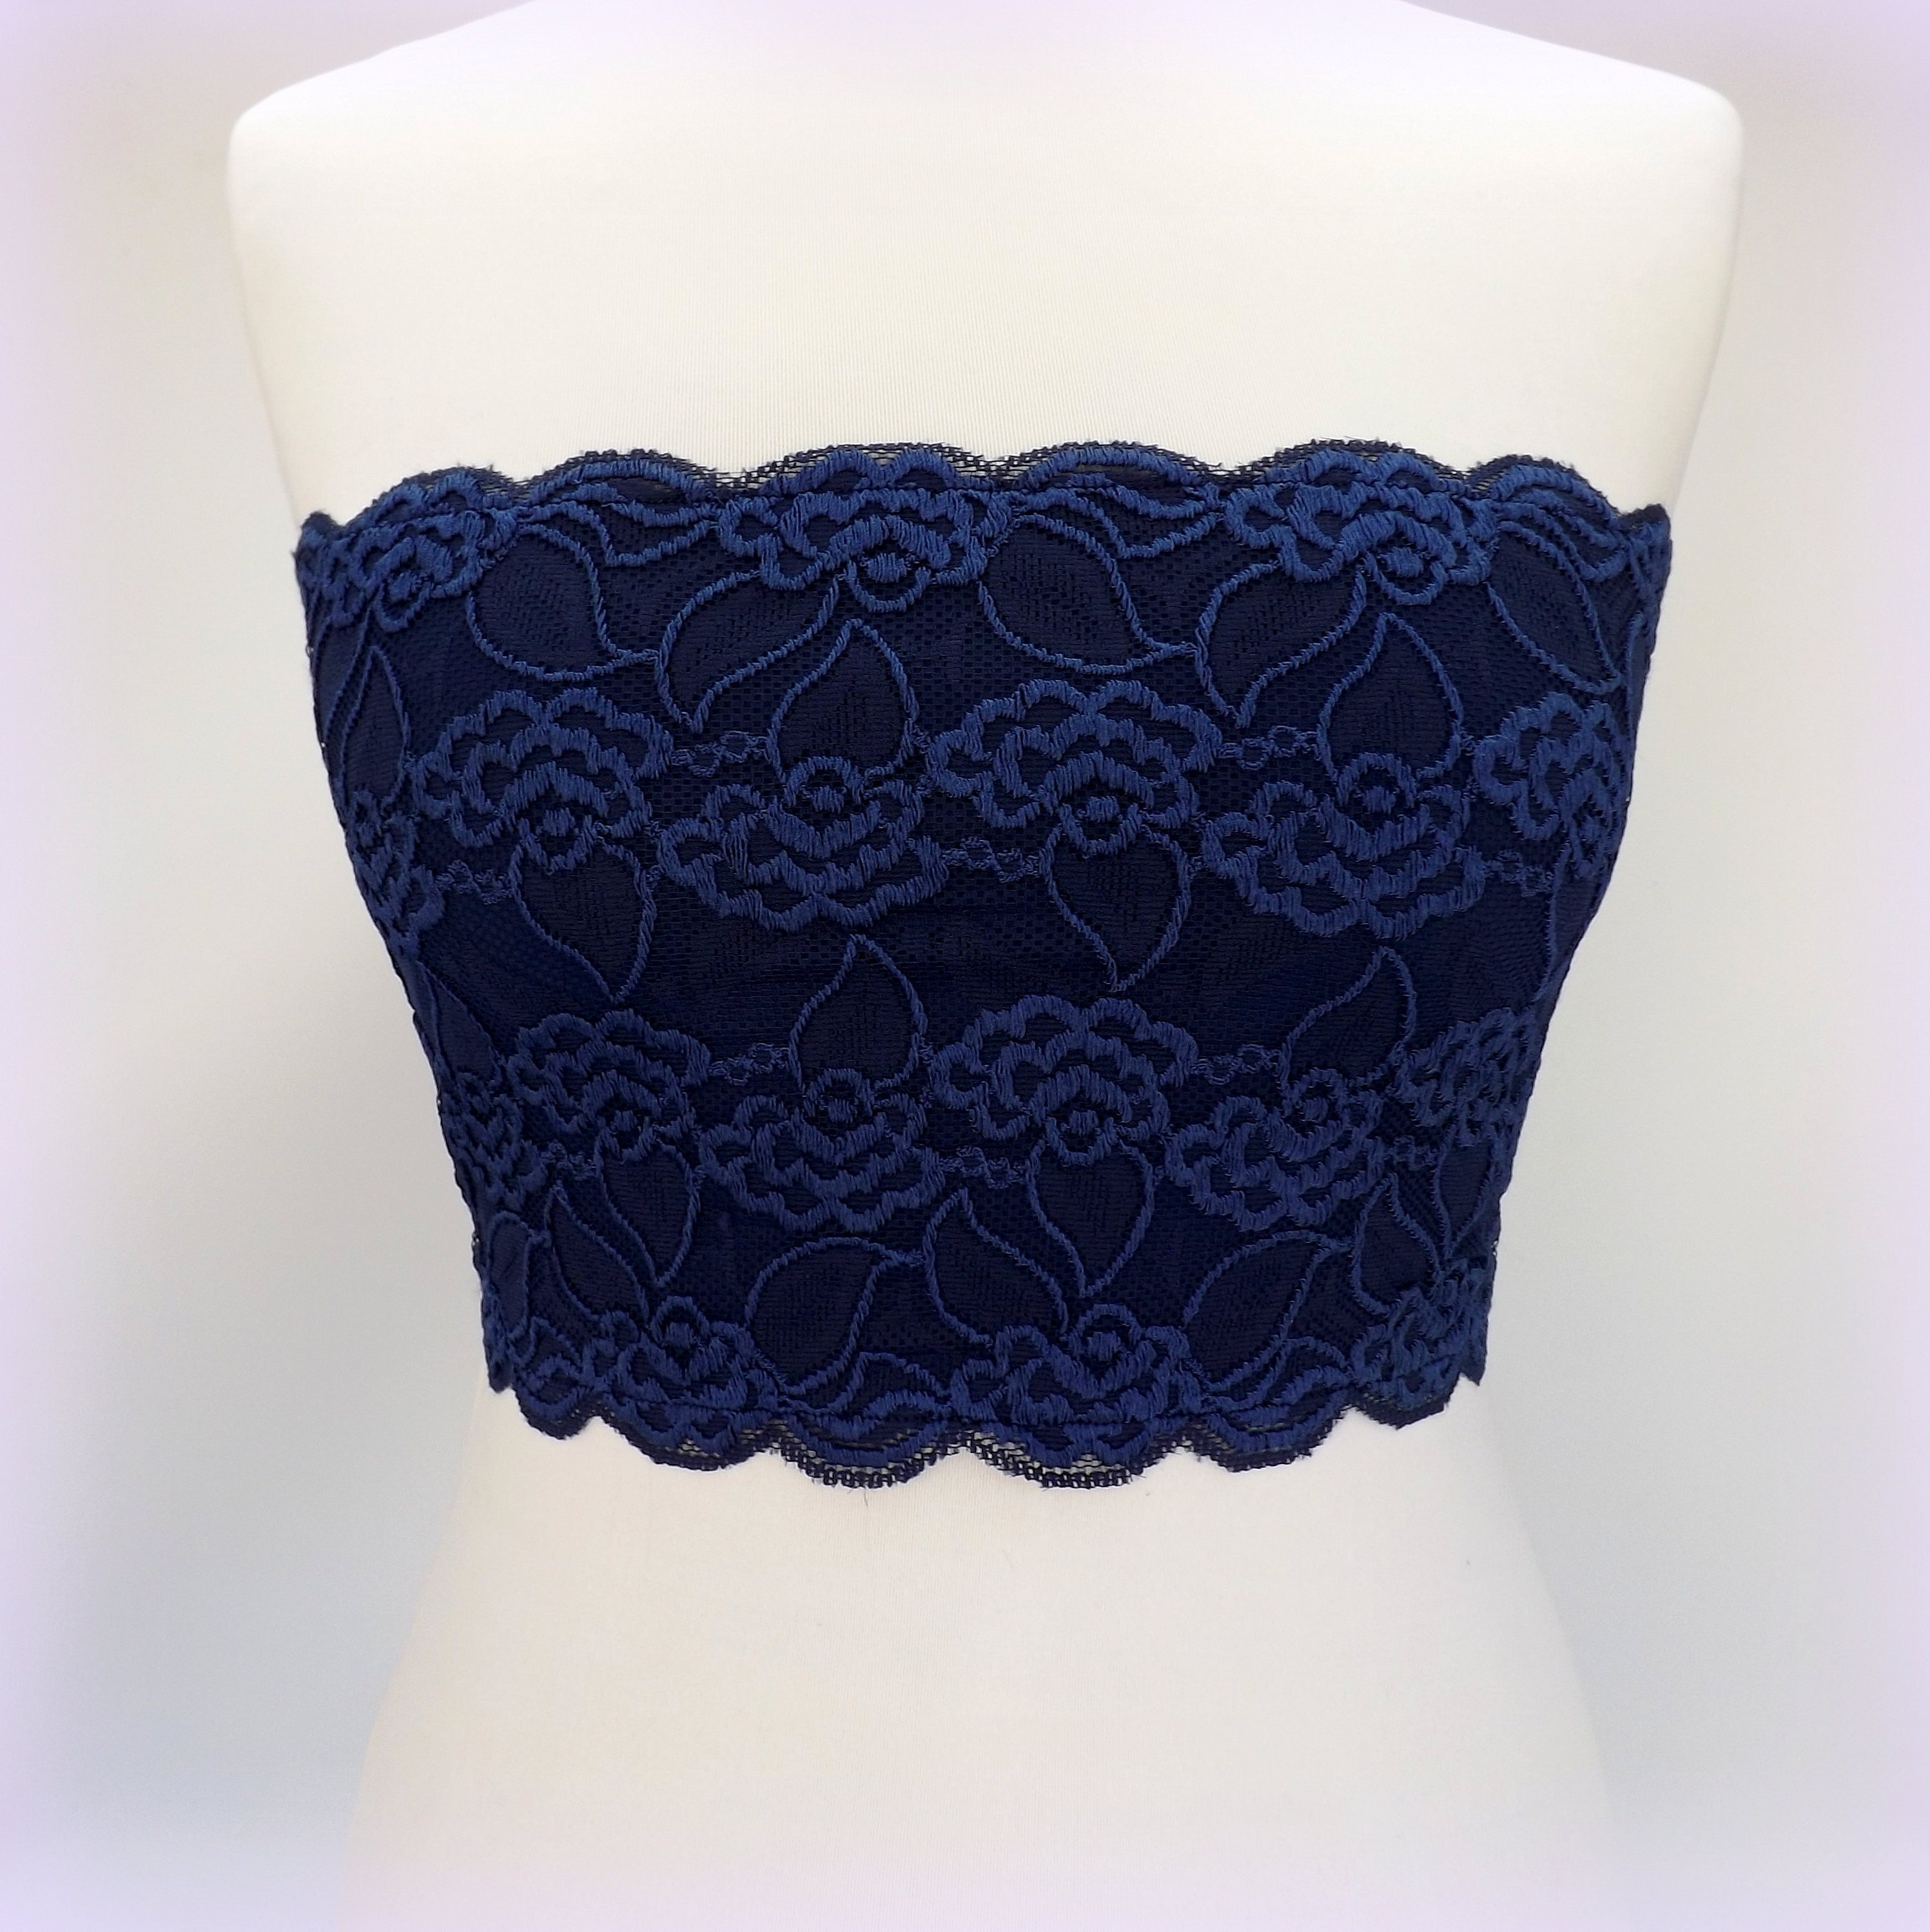  Navy Blue Lined Elastic Lace Bandeau Top, Size XS to